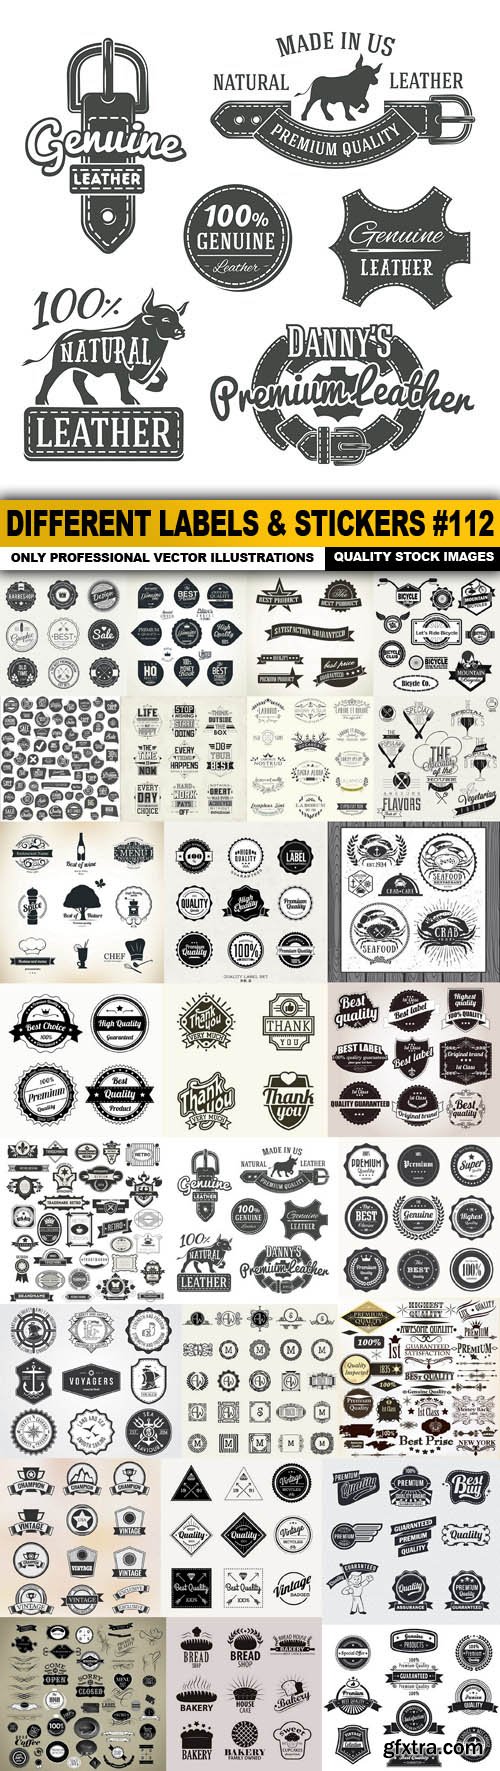 Different Labels & Stickers #112 - 26 Vector